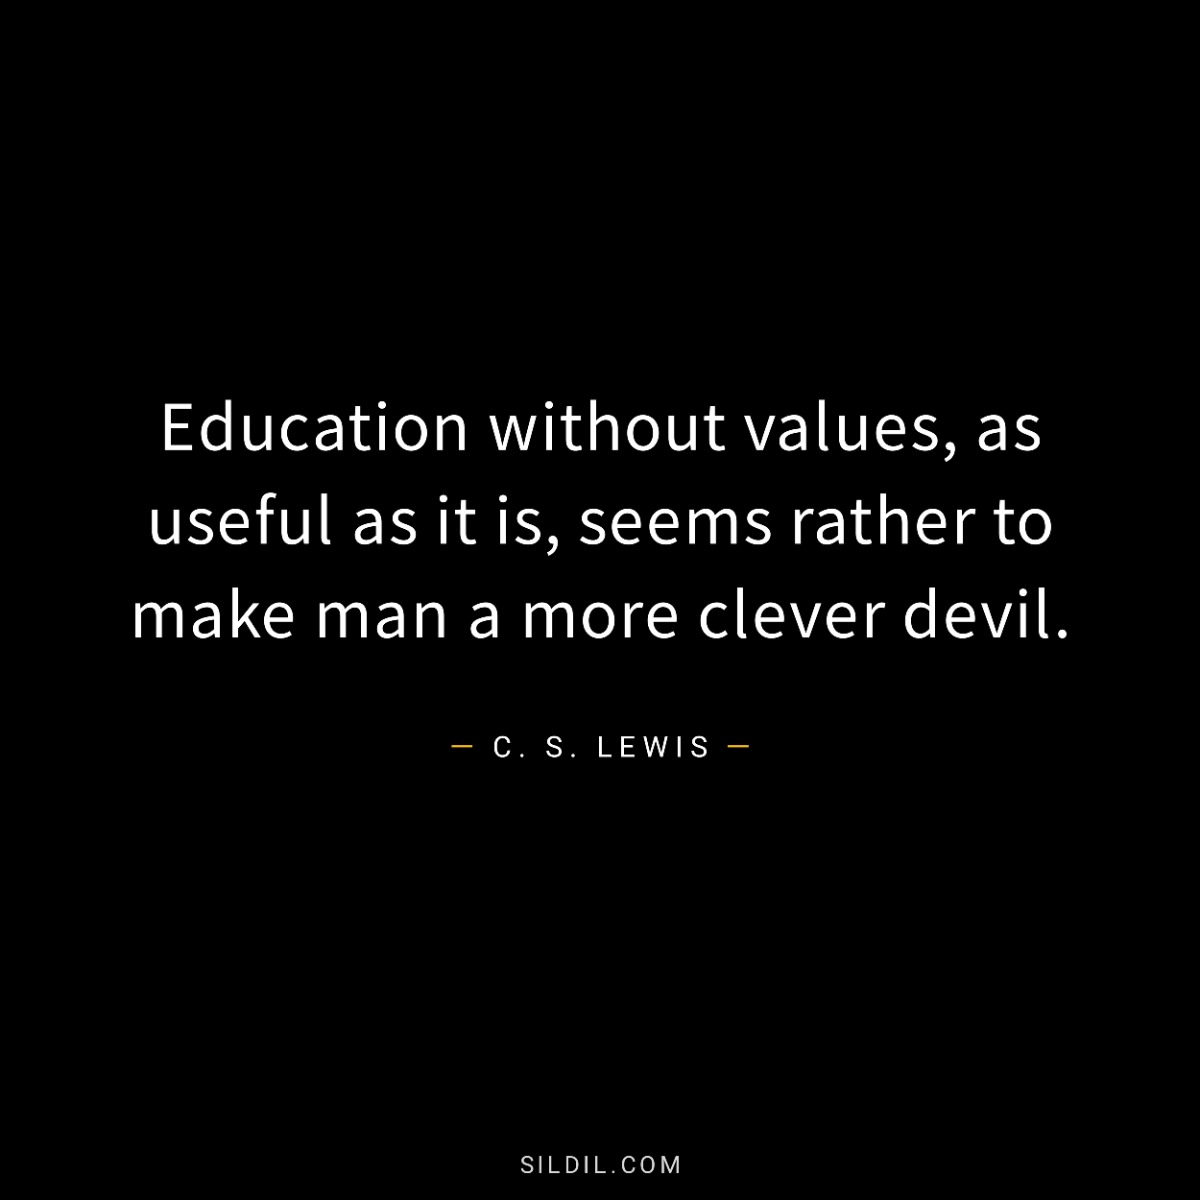 Education without values, as useful as it is, seems rather to make man a more clever devil.